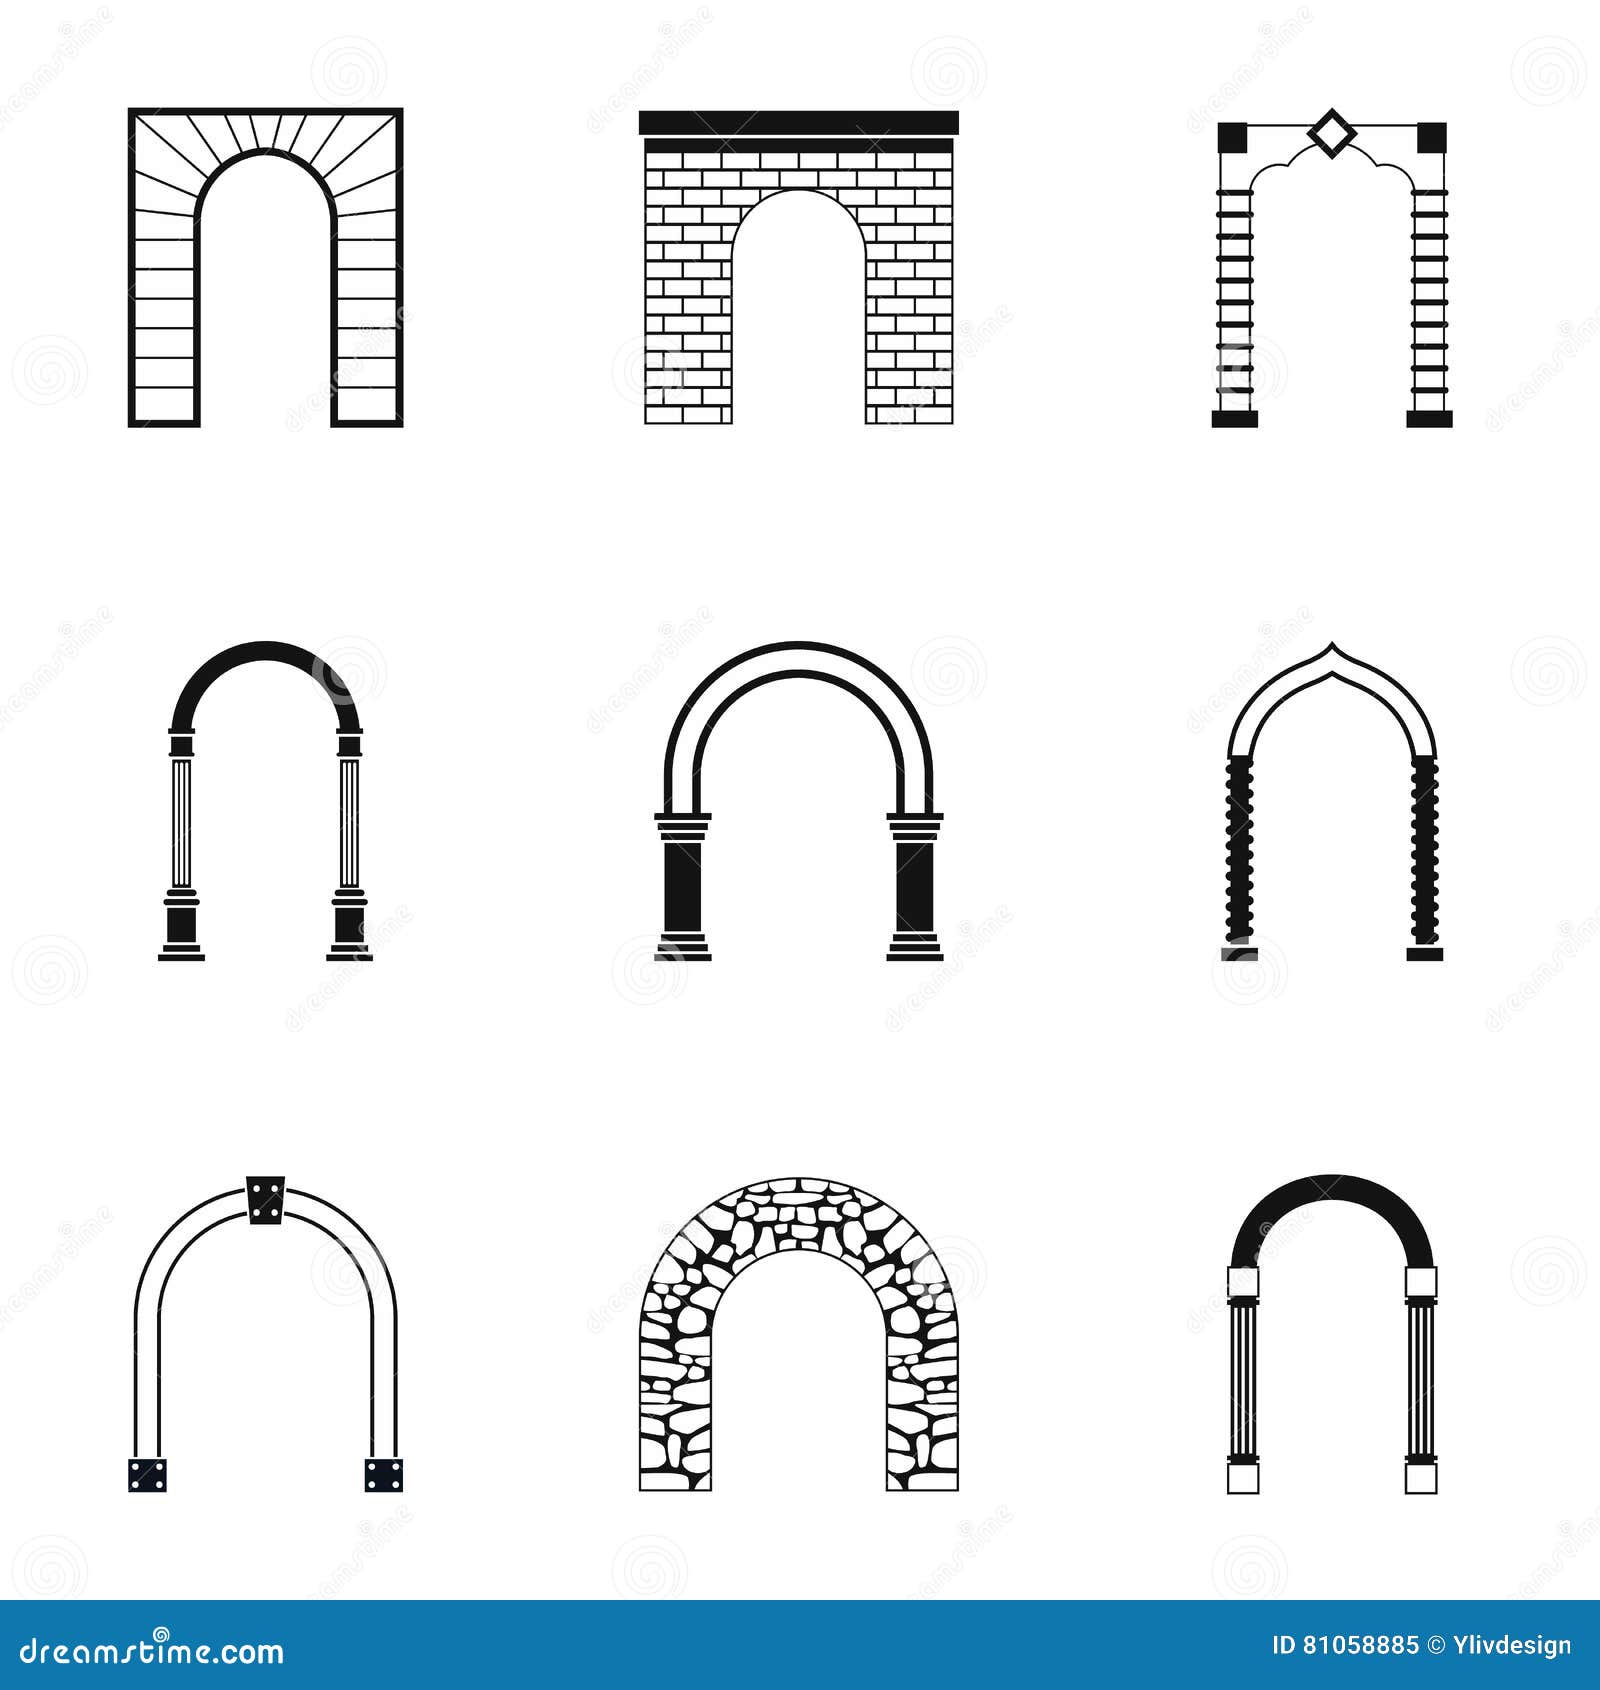 archway icons set, simple style